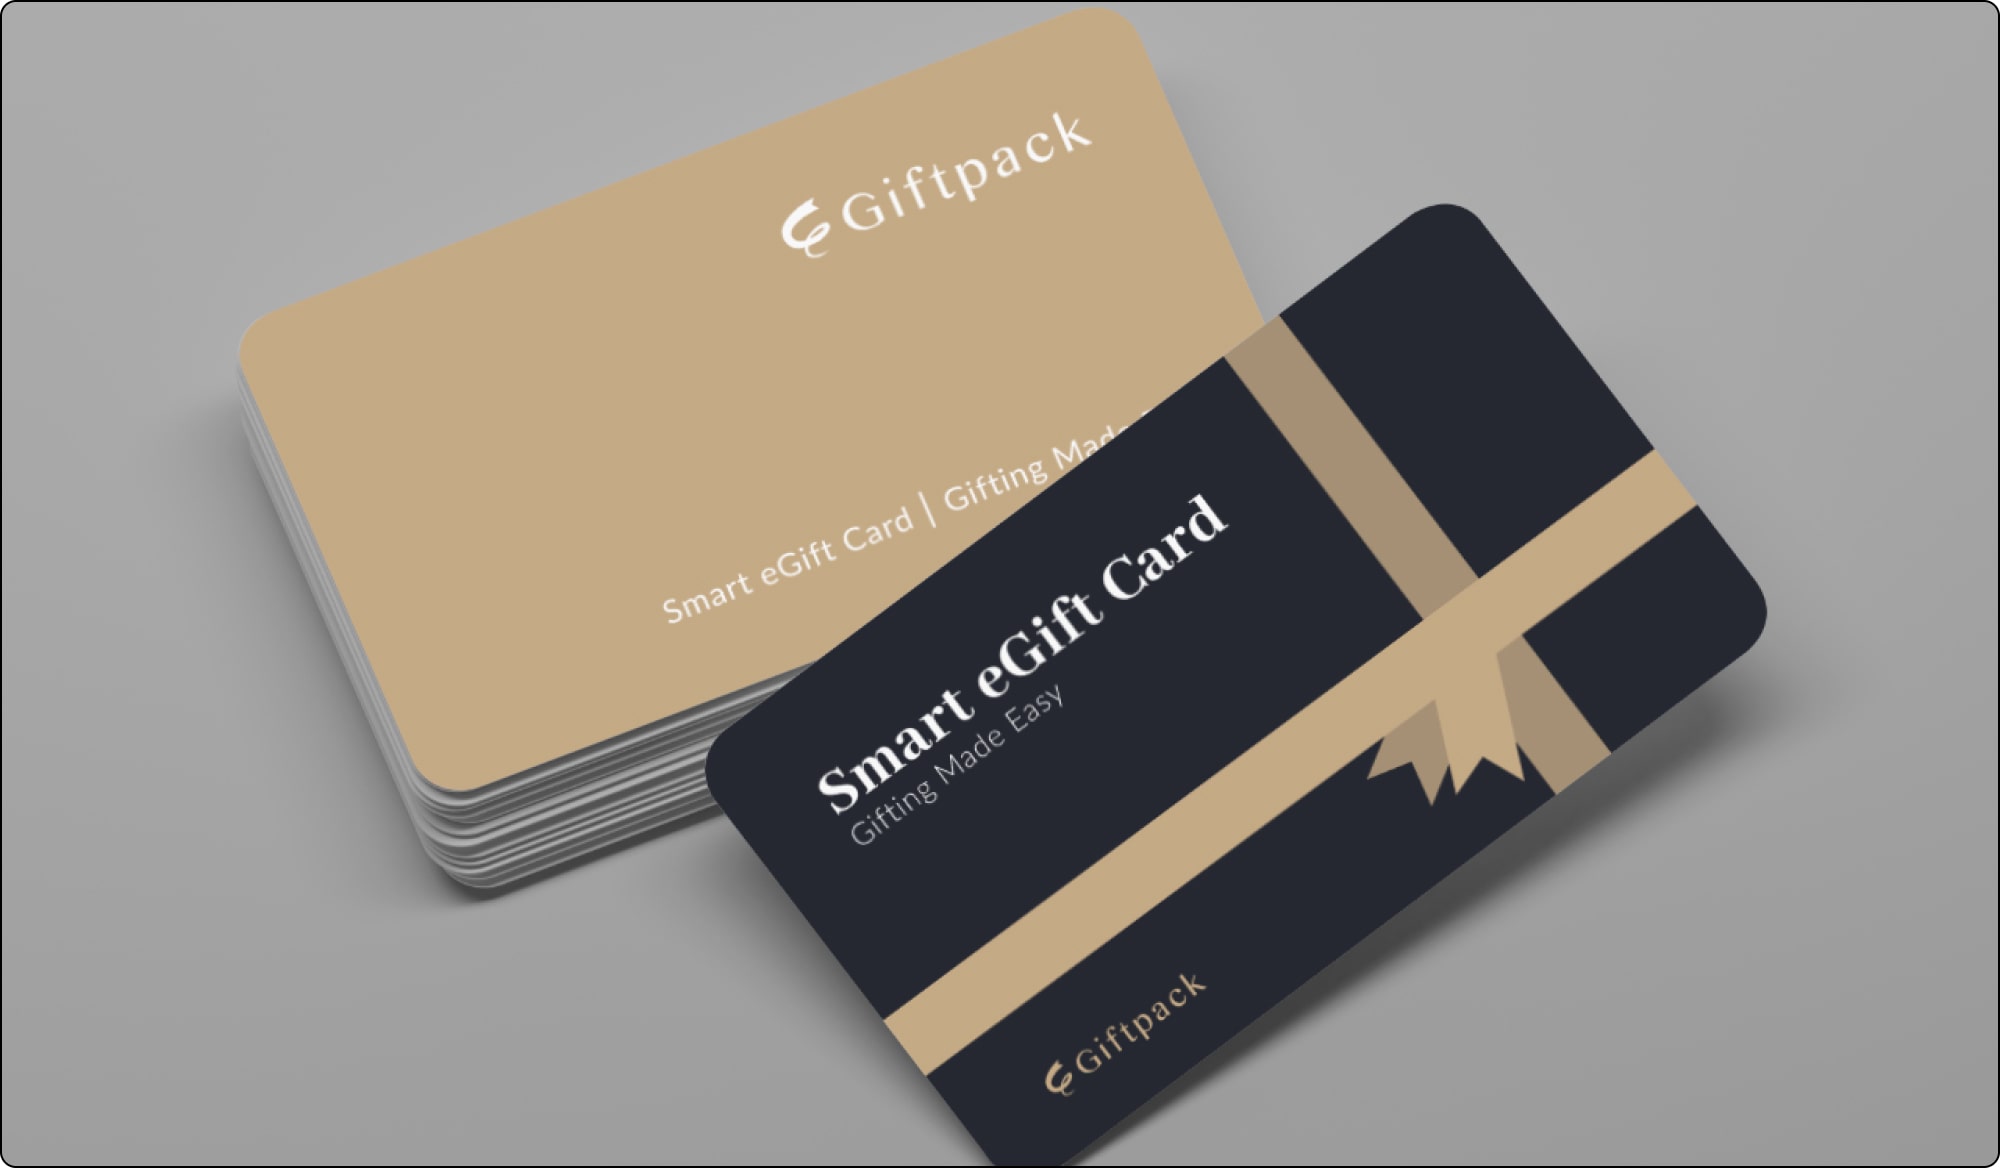 giftpack smart egift card for 350 brands for best holiday gifts for employees